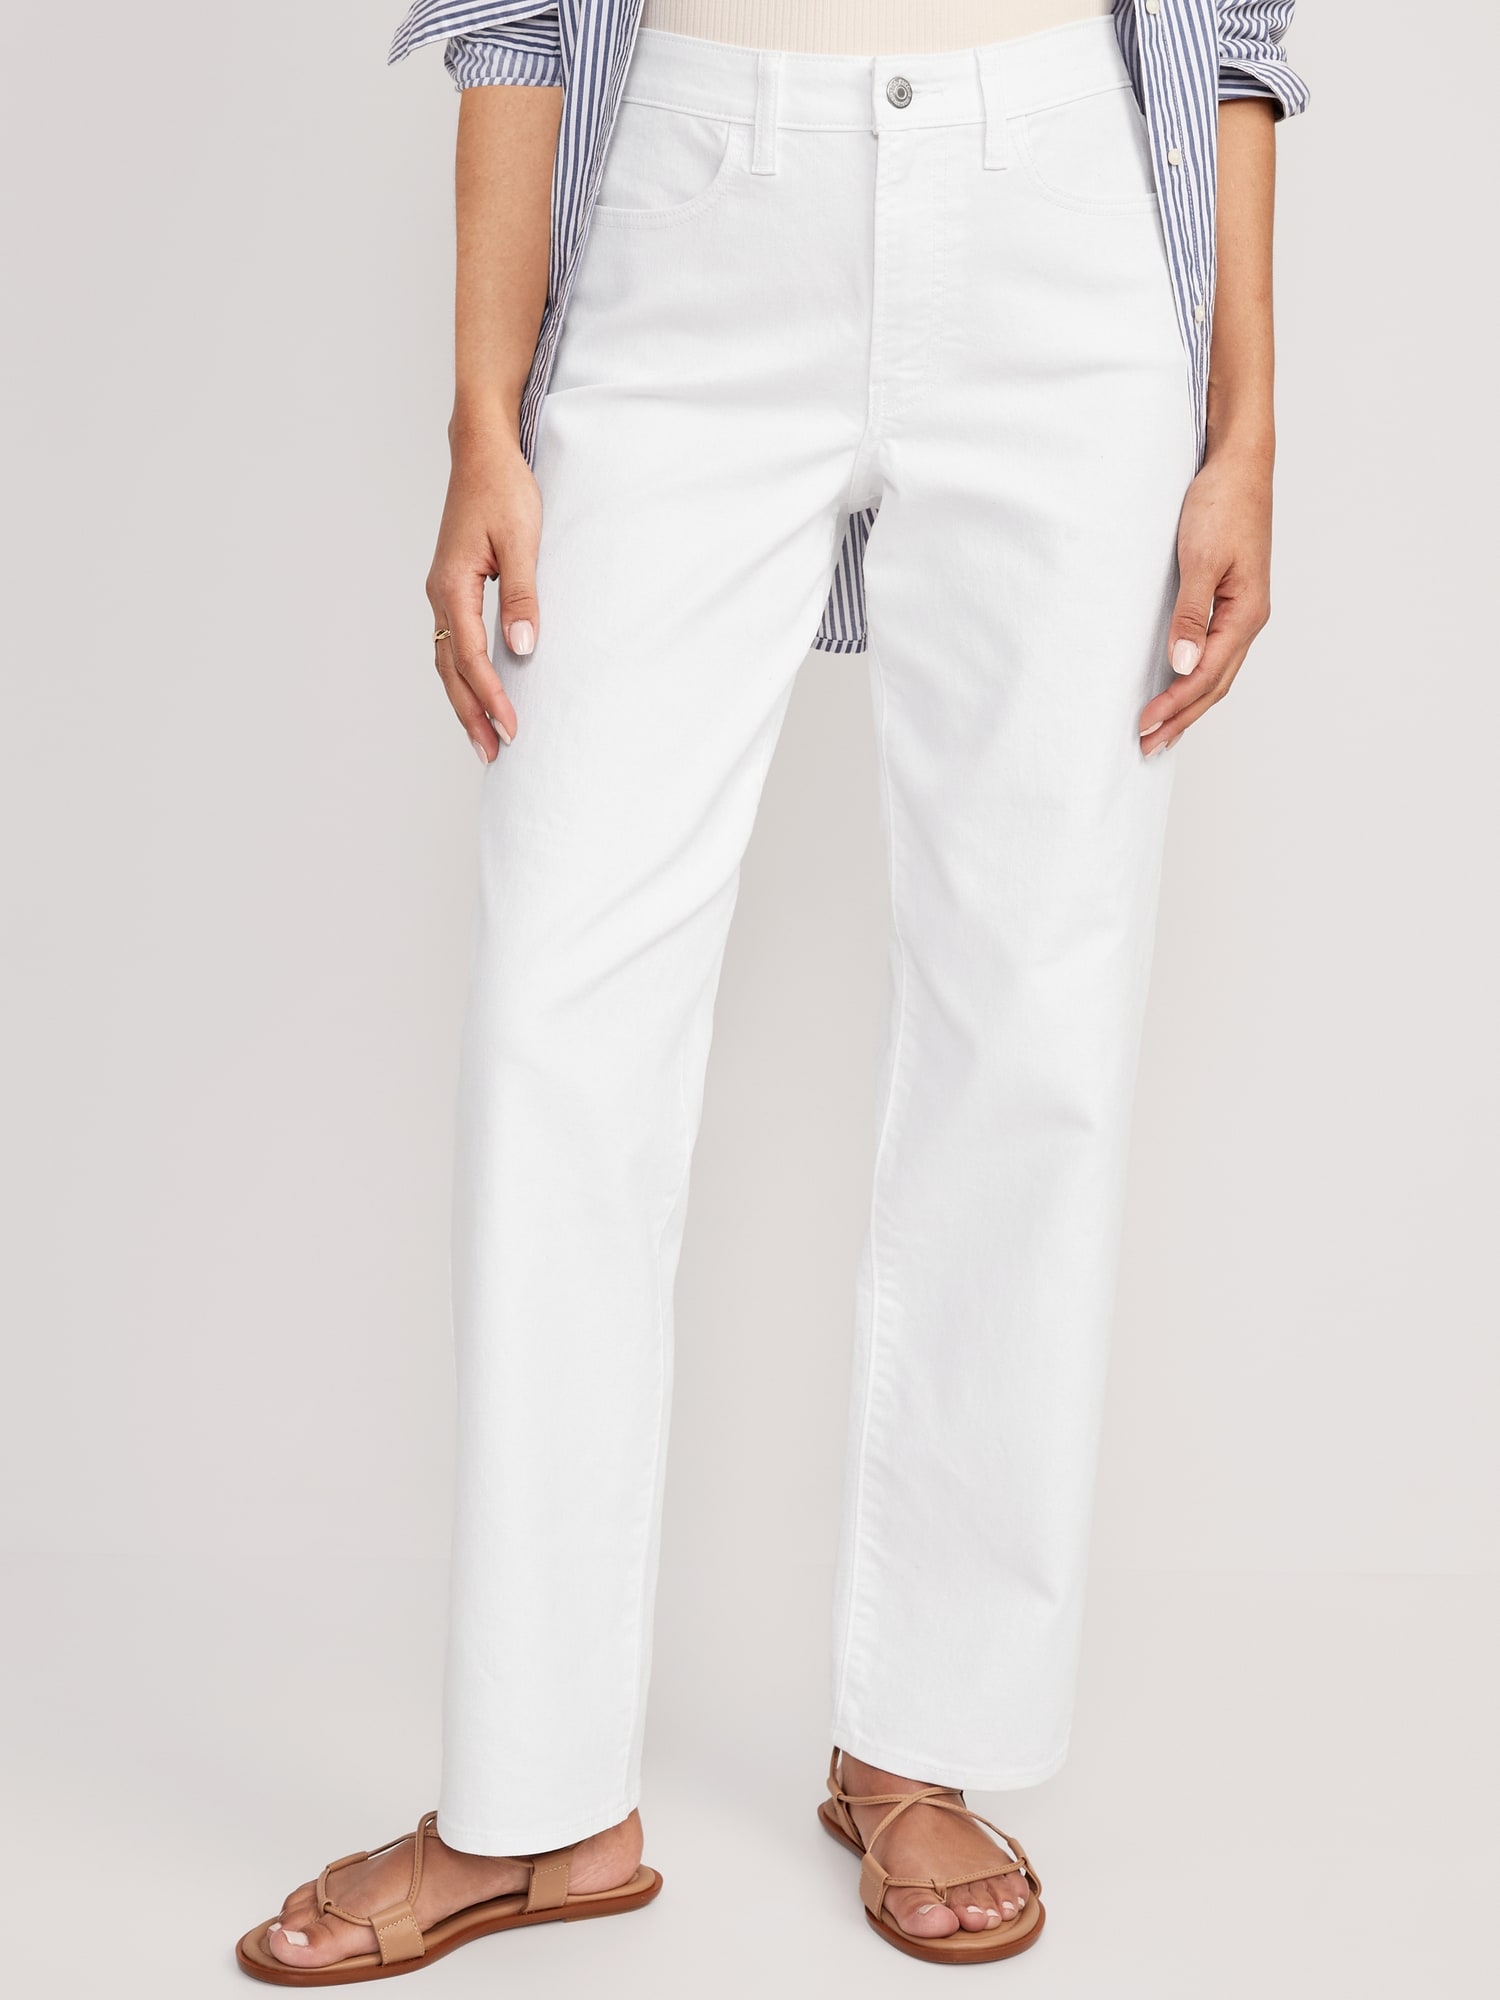 The Best-Rated White Jeans For Women in 2021 | POPSUGAR Fashion UK